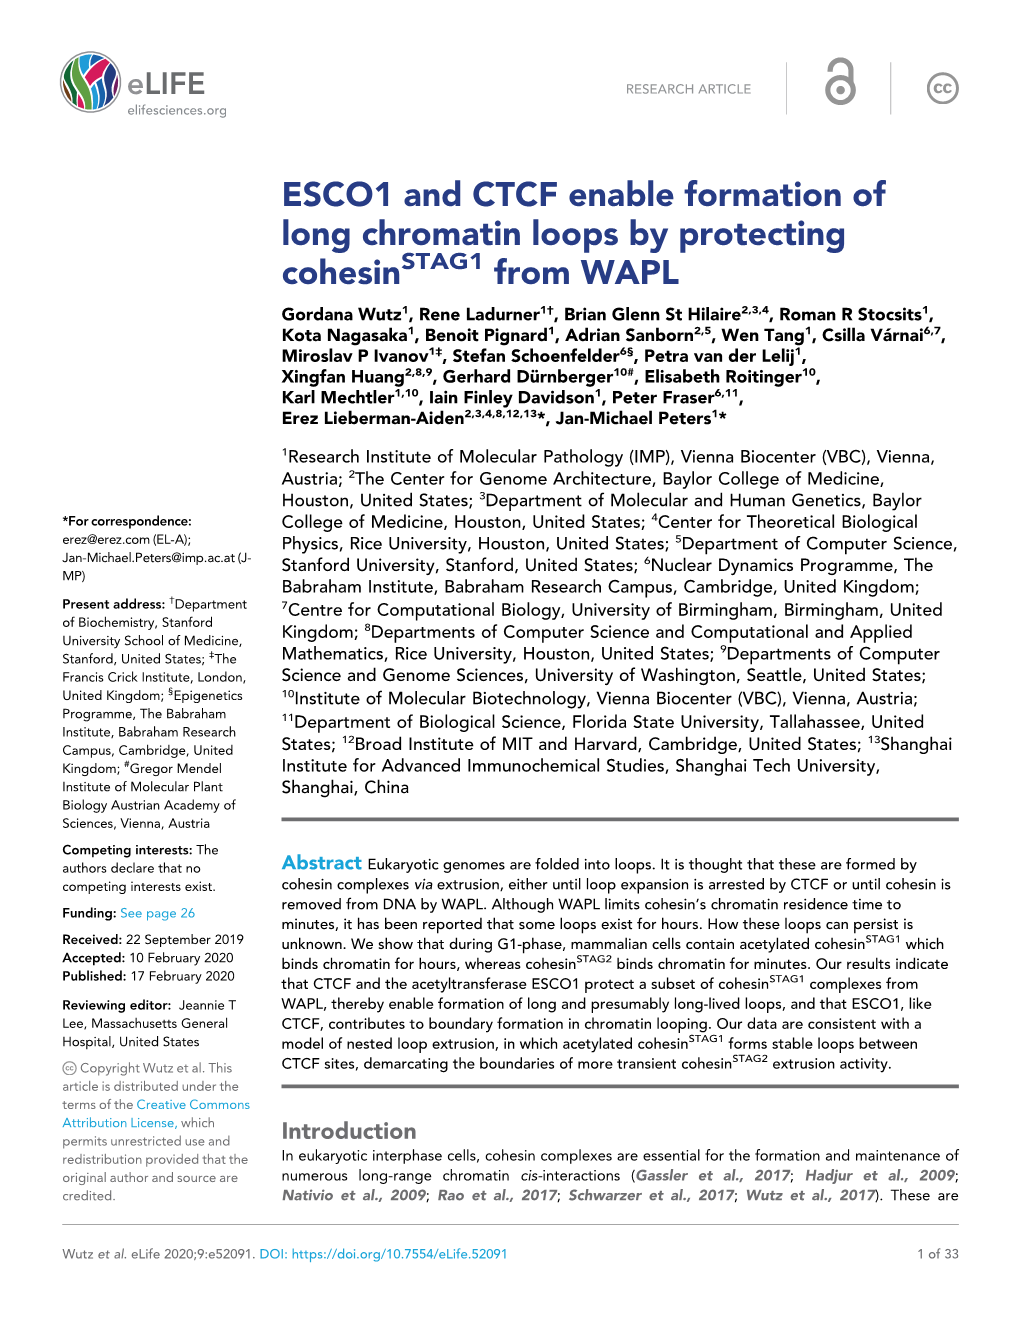 ESCO1 and CTCF Enable Formation Of